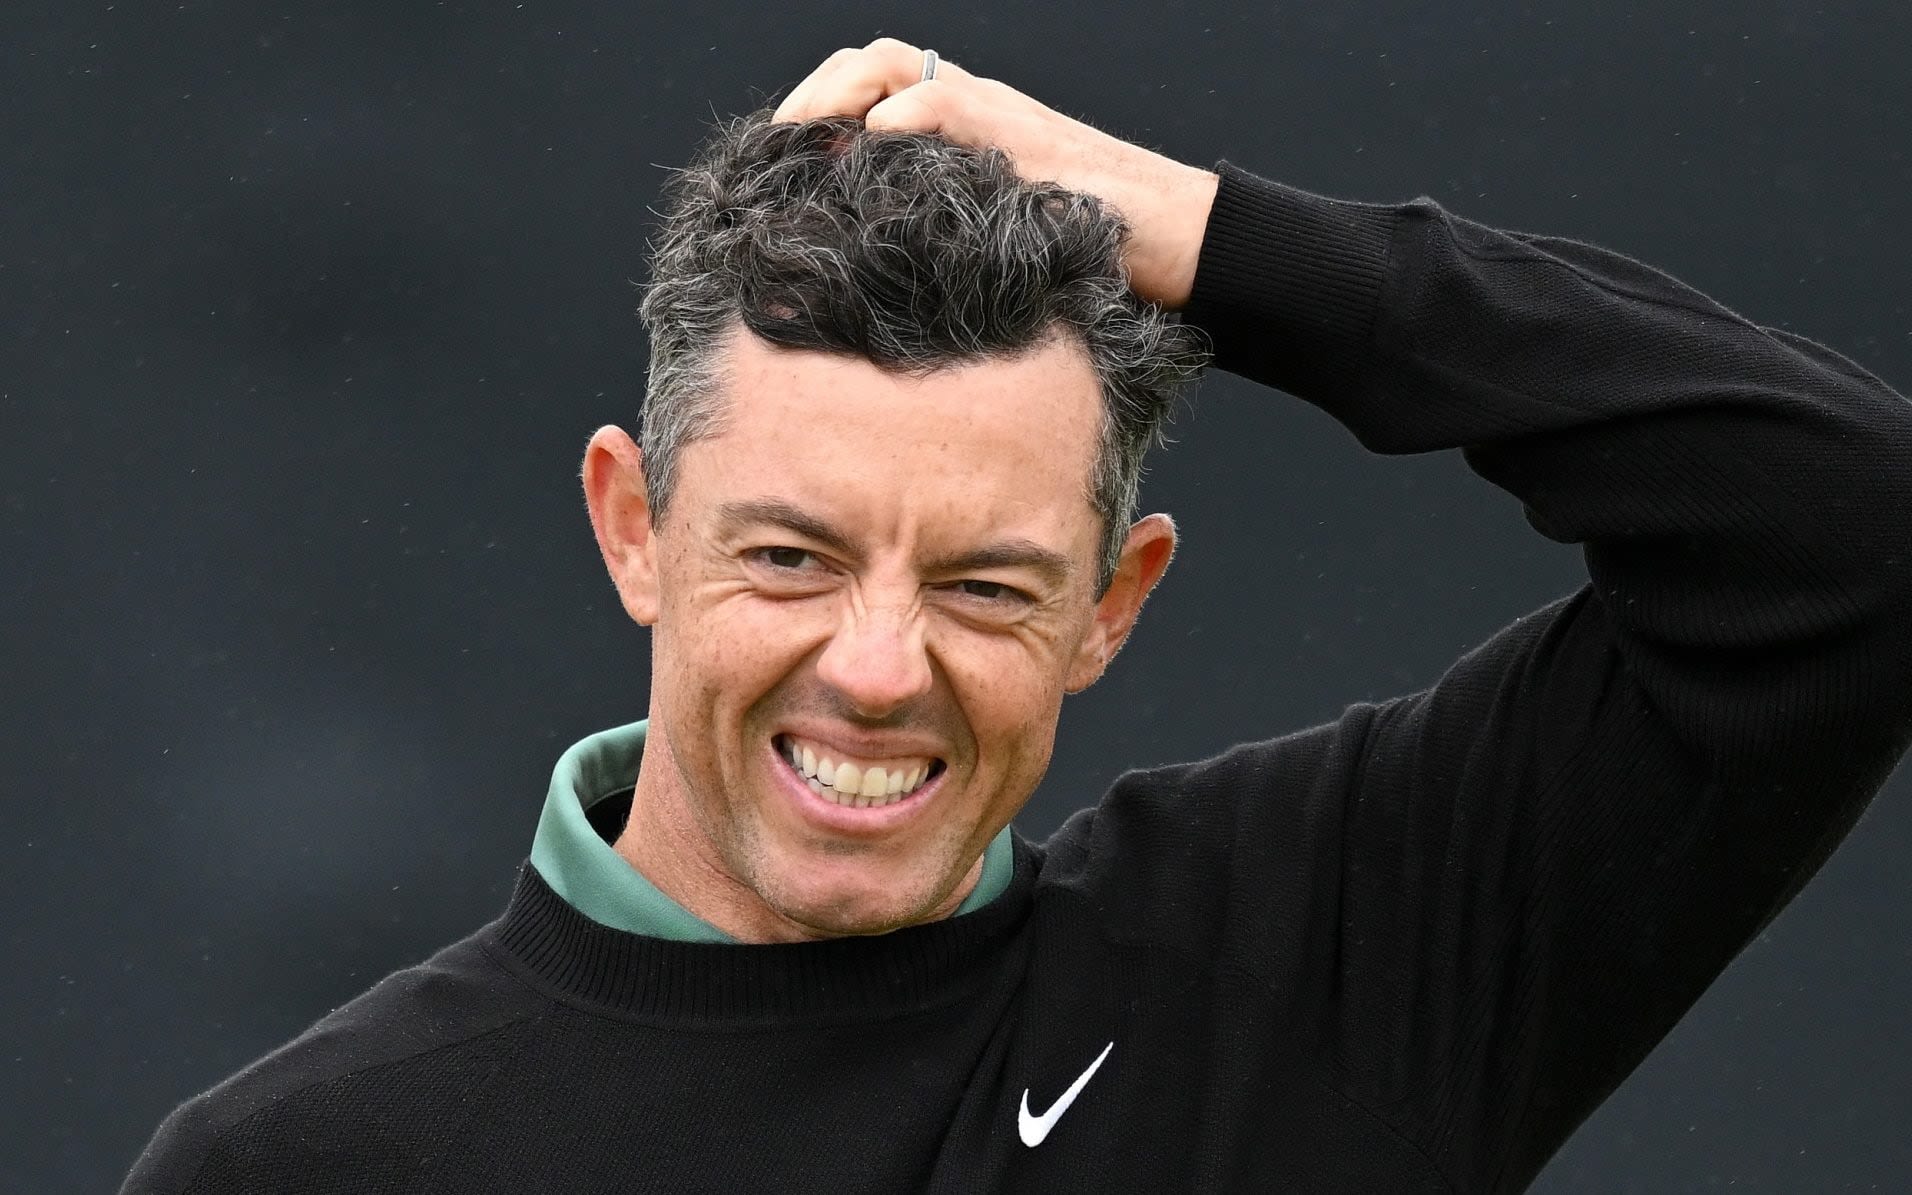 Rory McIlroy’s only mercy was that he did not hit the 13:00 train from Glasgow